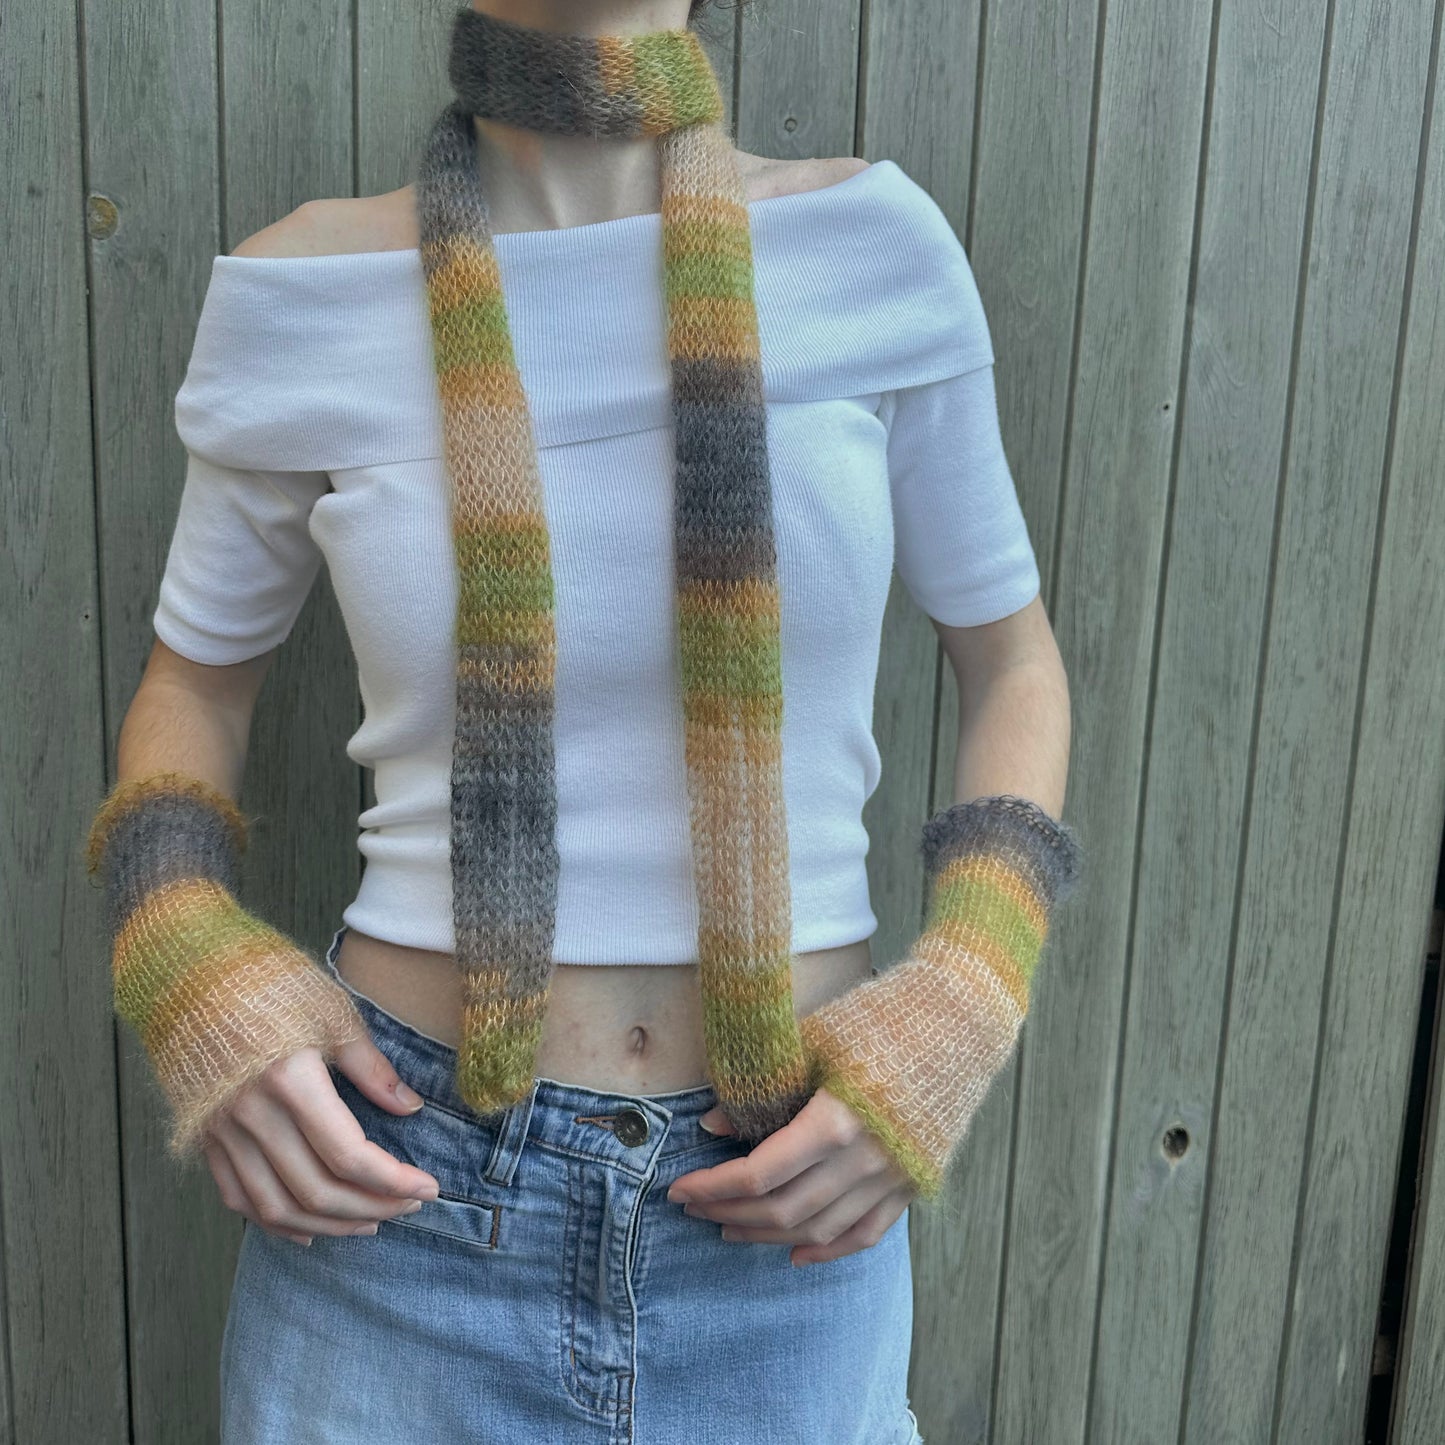 Handmade knitted mohair hand warmers in ombré earth tones - with thumb hole